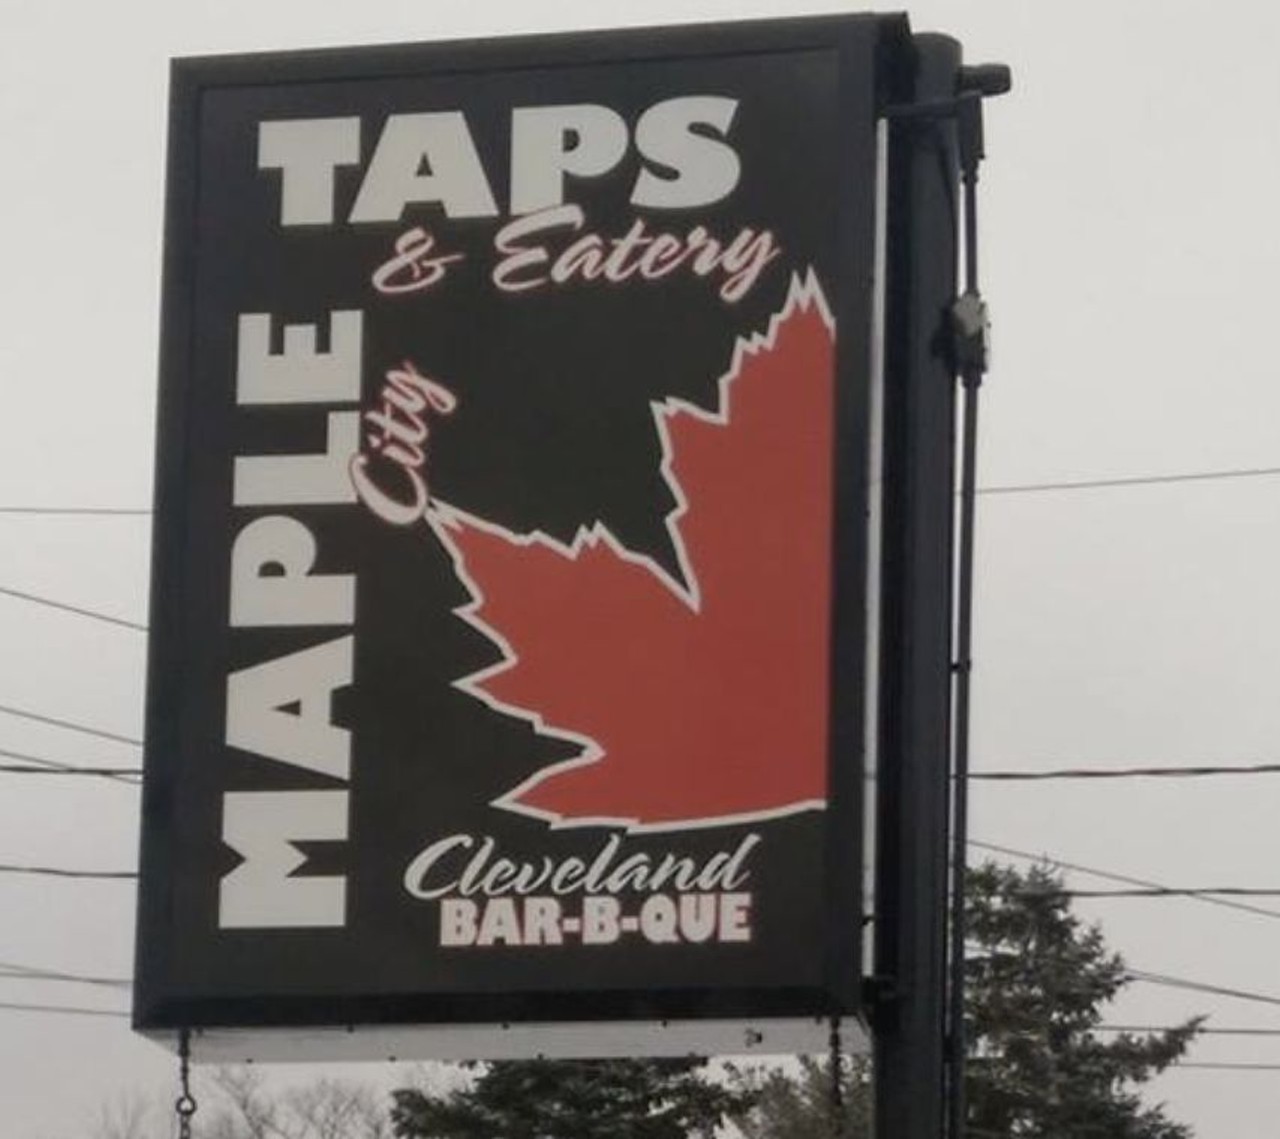  Maple City Taps
11095 Chardon Rd., Chardon 
Country folk need barbecue too. Chardon may be a trek, but they have some good eating out there. The ribs are fantastic, the wings are on point and the maple barbecue sauce is really special. 
Photo via Maple City Taps/Facebook